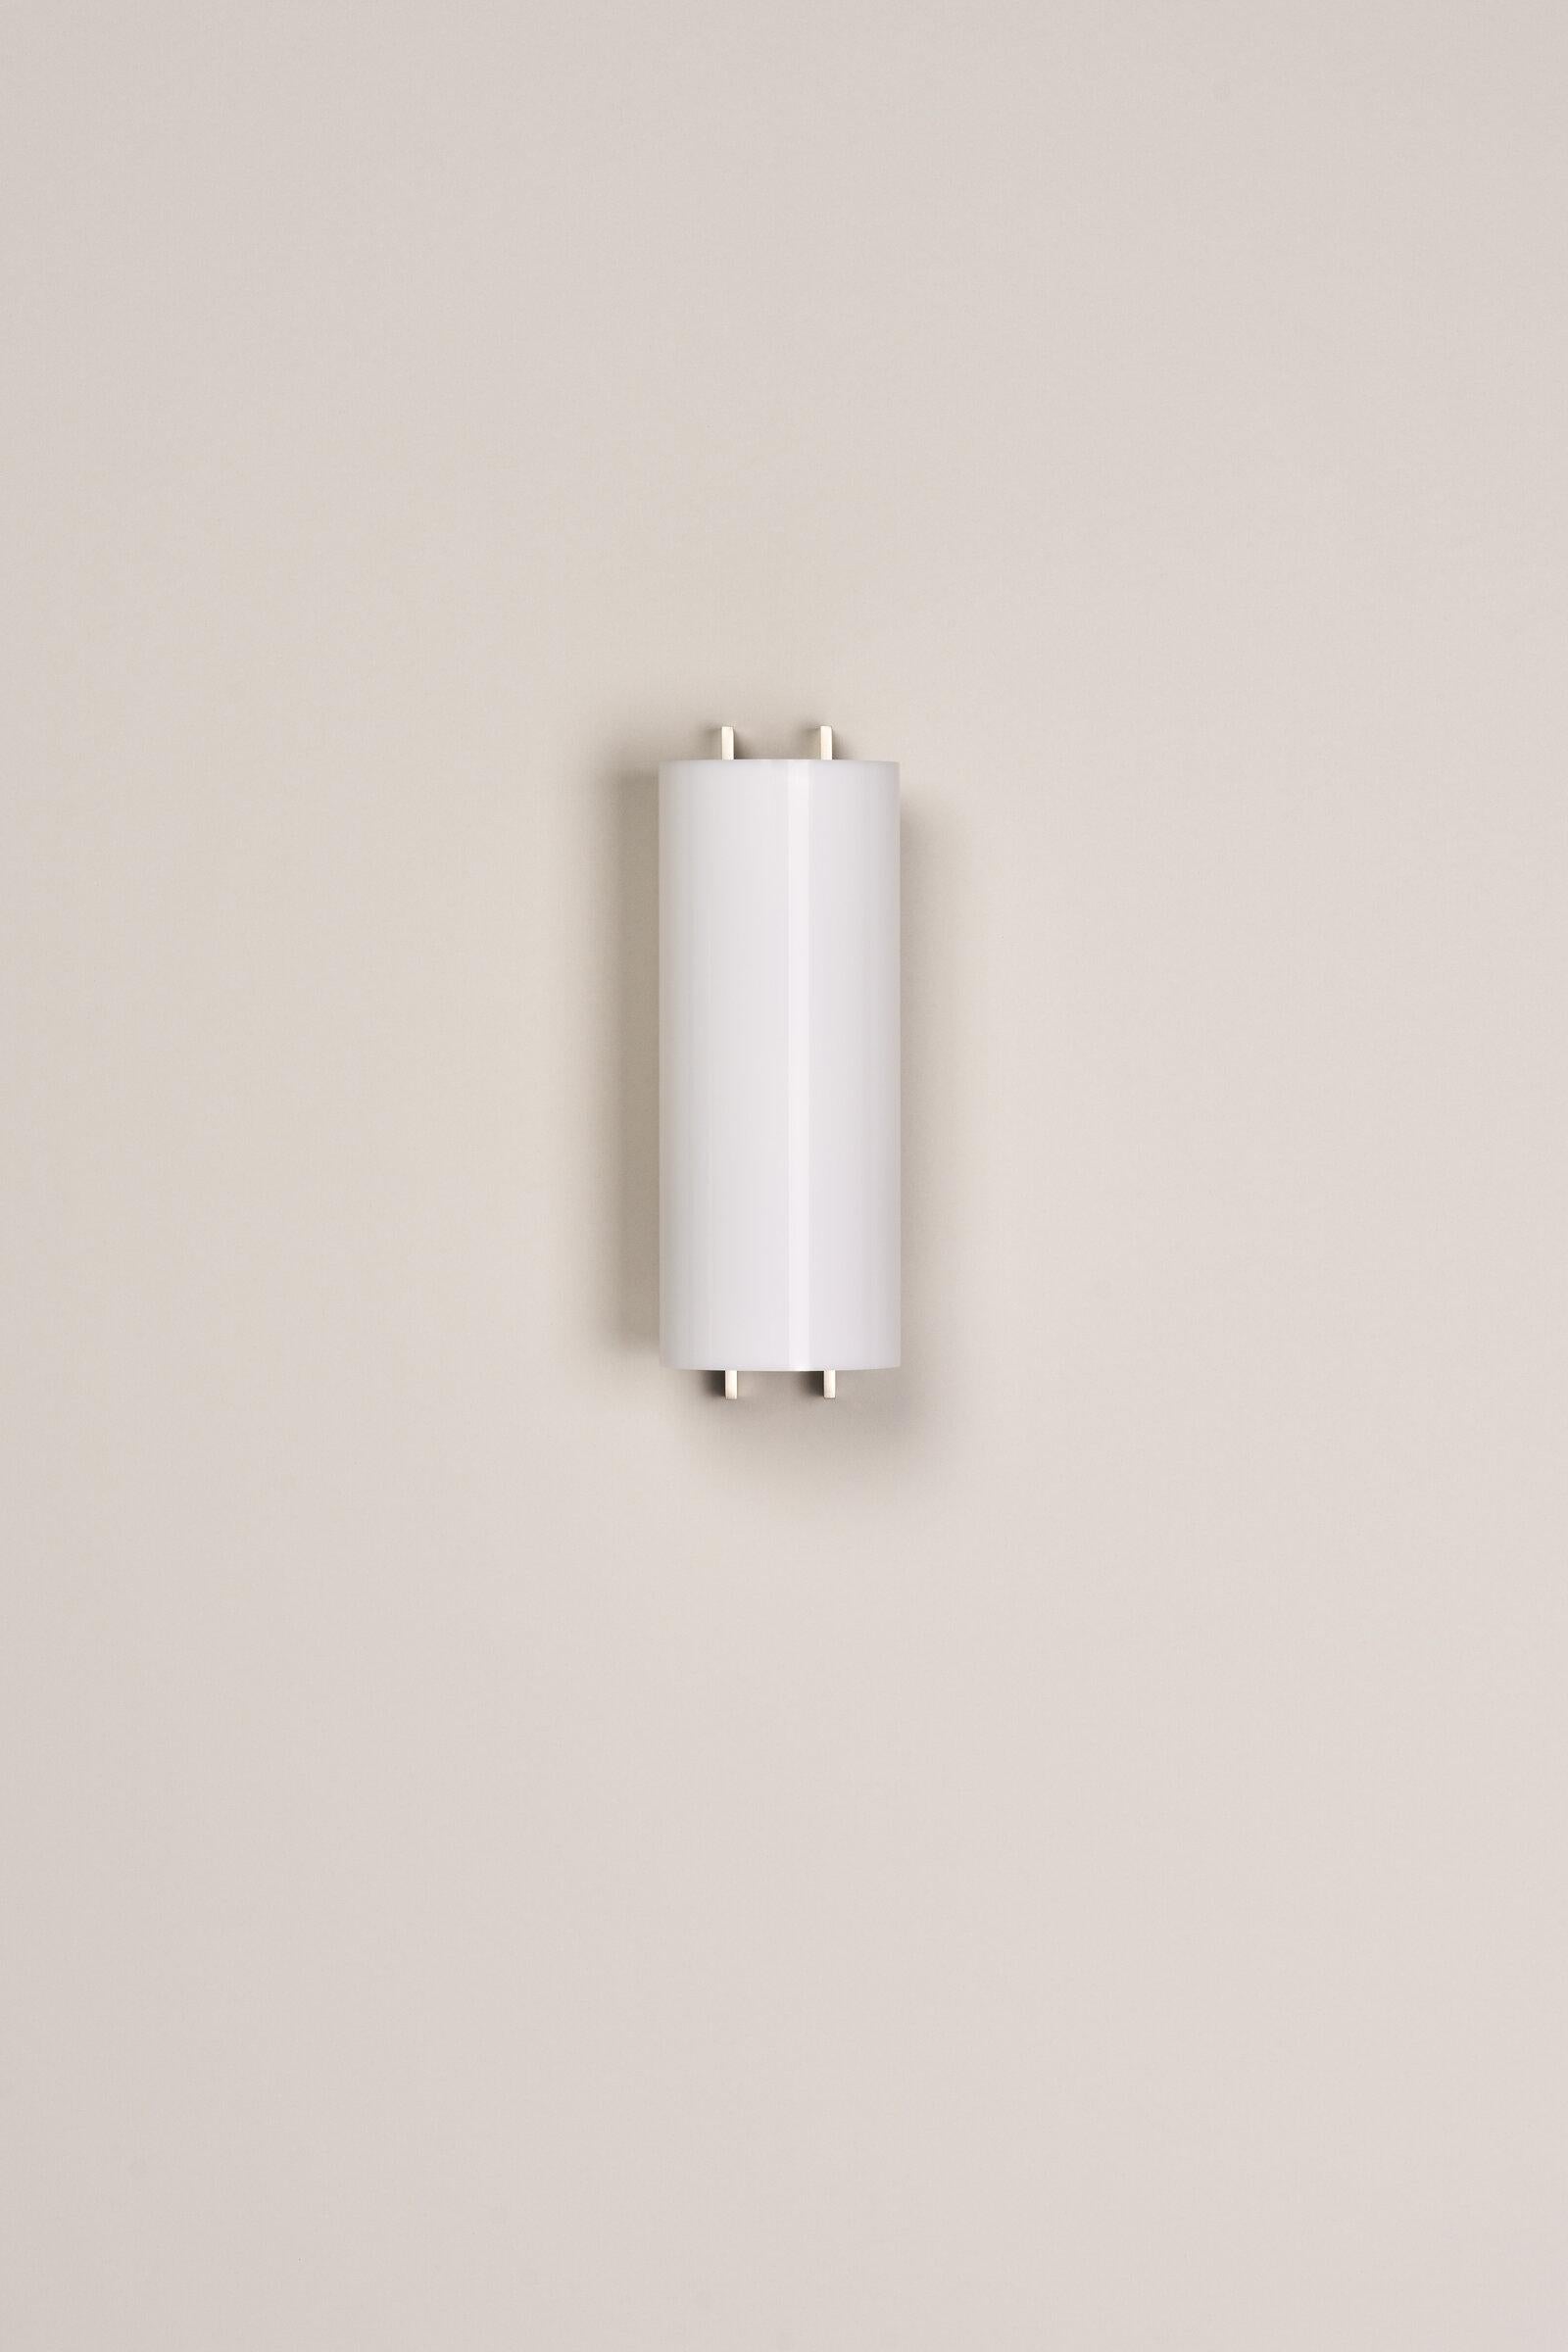 Spanish TMM Metálico Wall Lamp by Miguel Milá For Sale